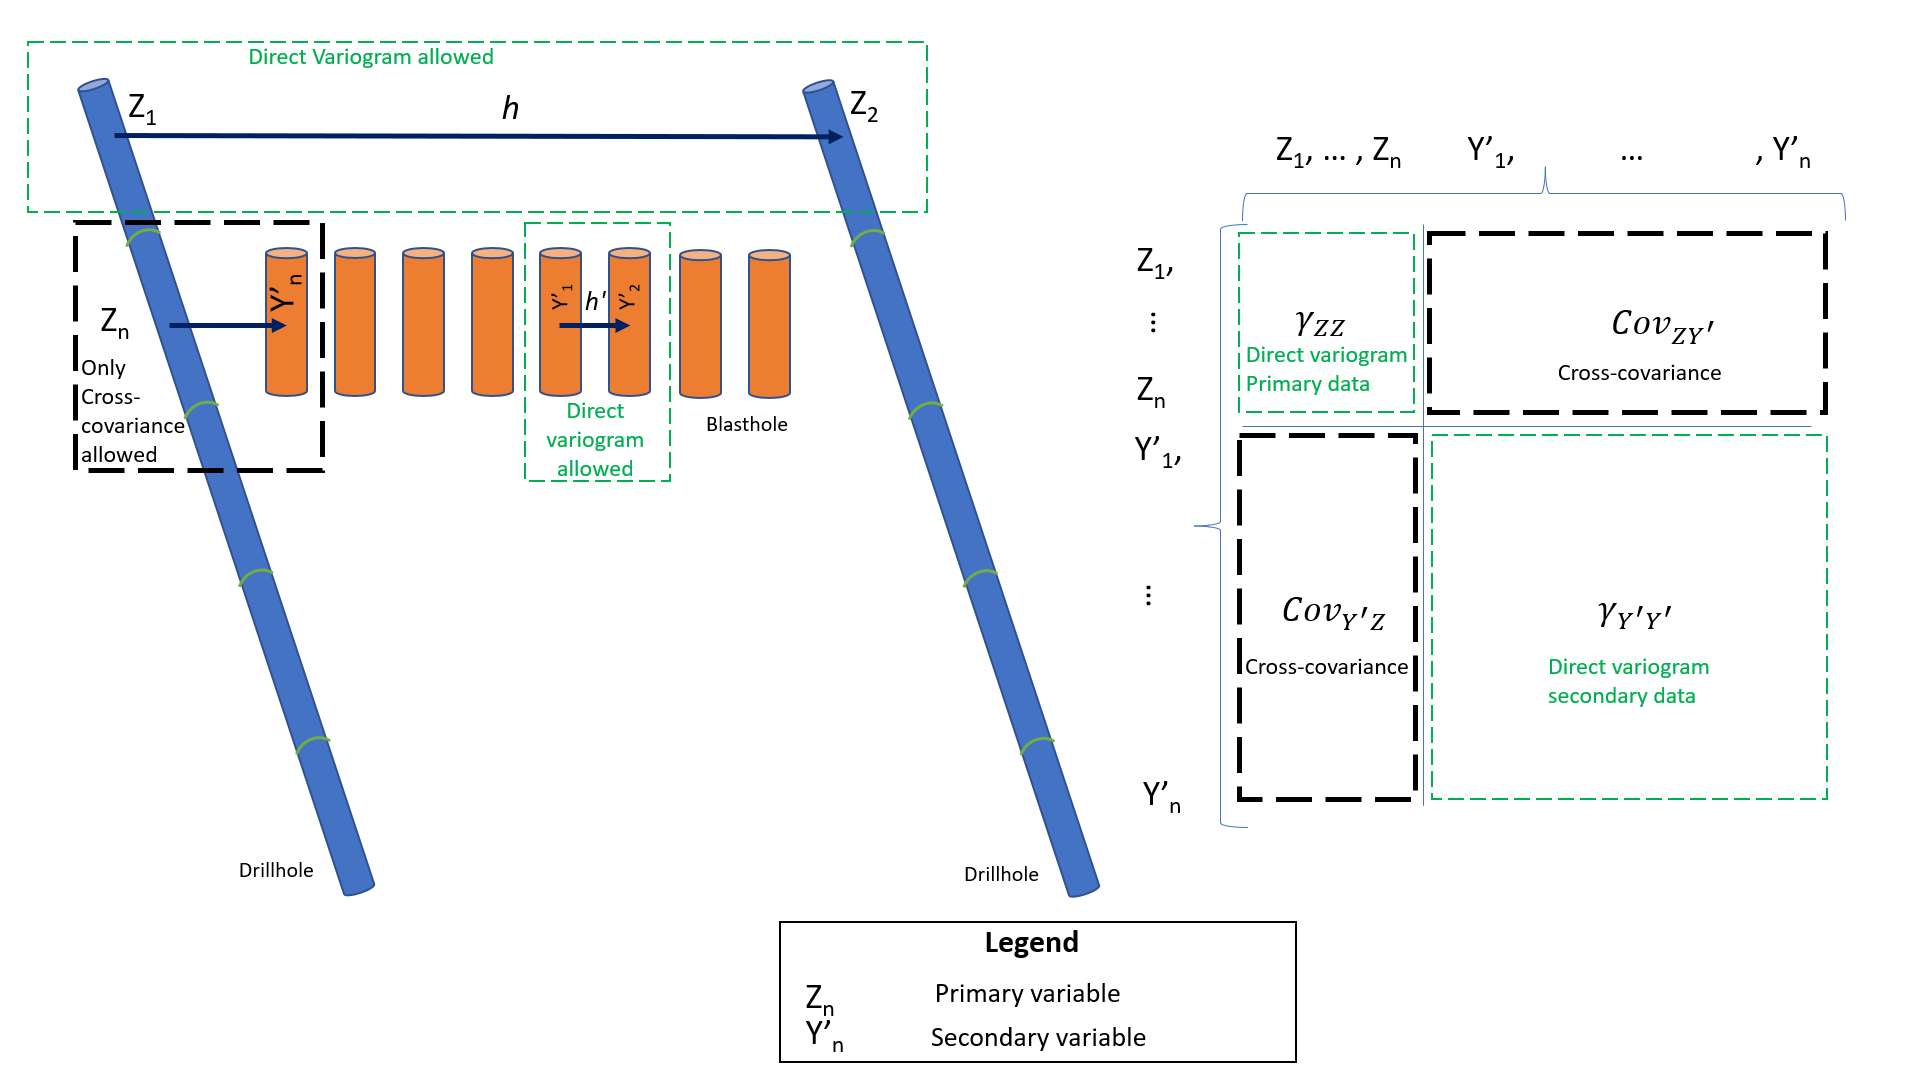 Left: Schematic cross-section with drill holes and some blast holes to show when the cross variogram can be calculated. Right: Schematic representation of relationships between variables to describe the spatial variability, the system of equation are shown later in the text.